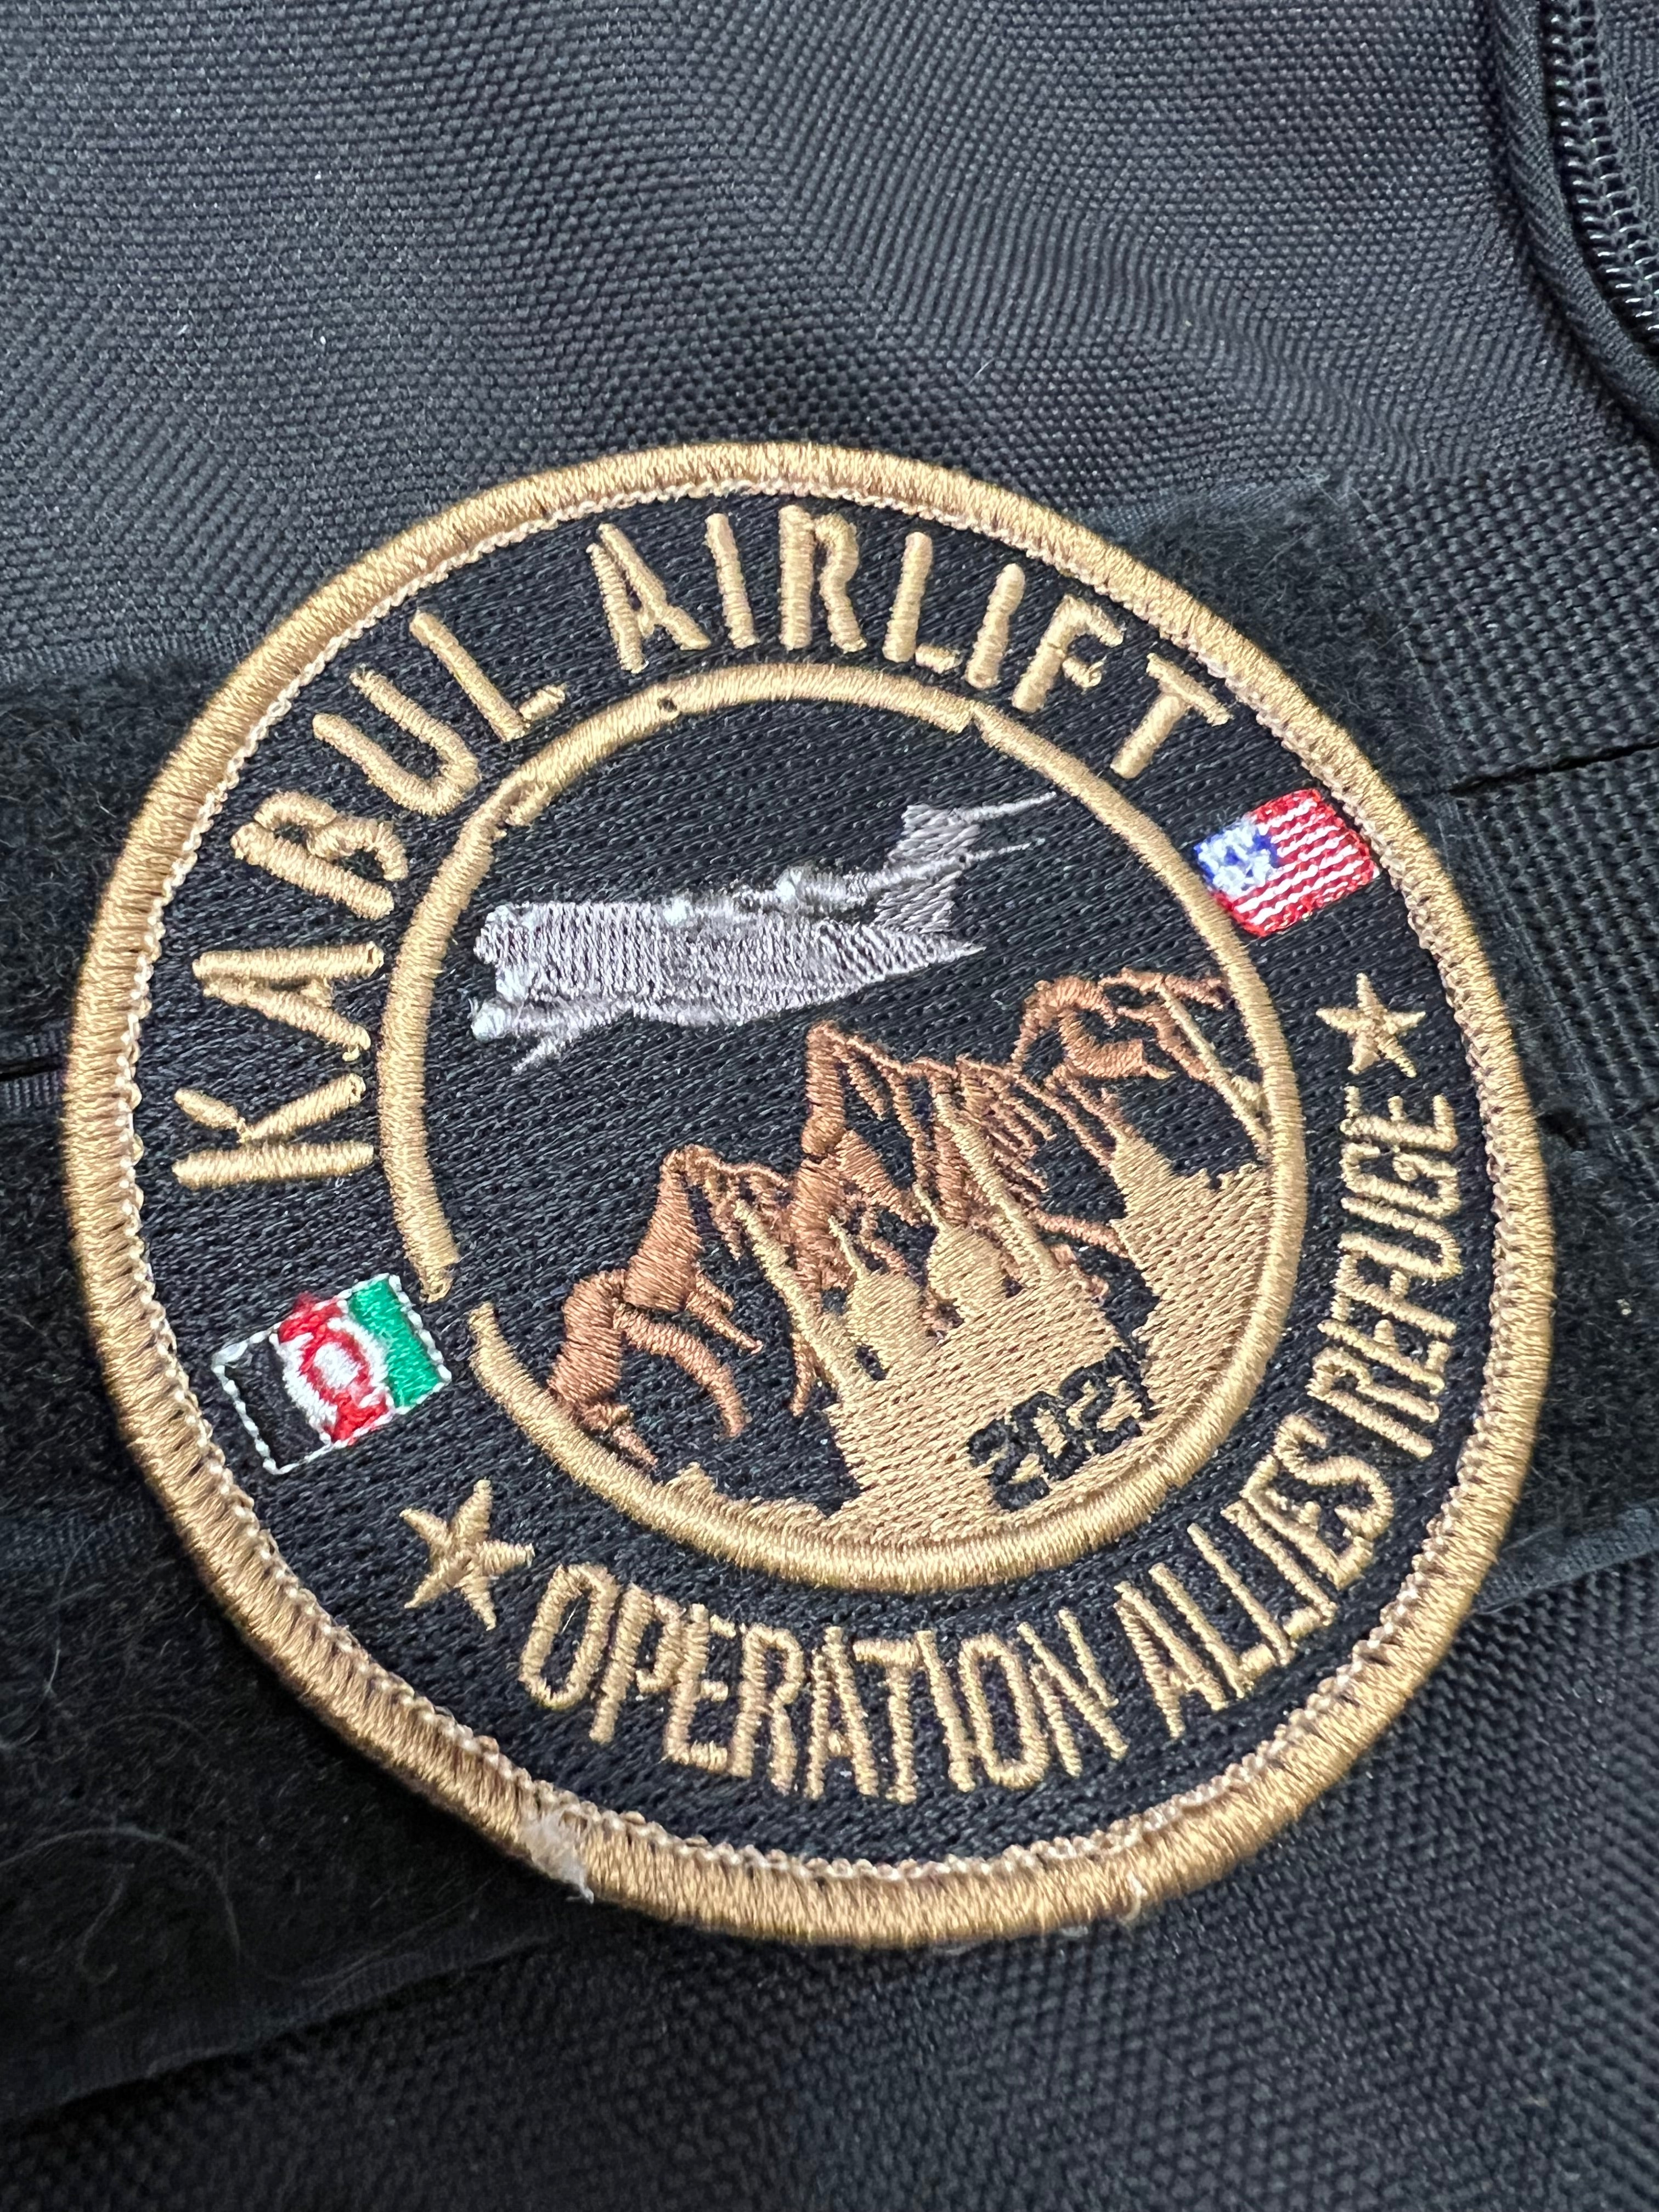 Operation Allies Refuge Kabul Airlift